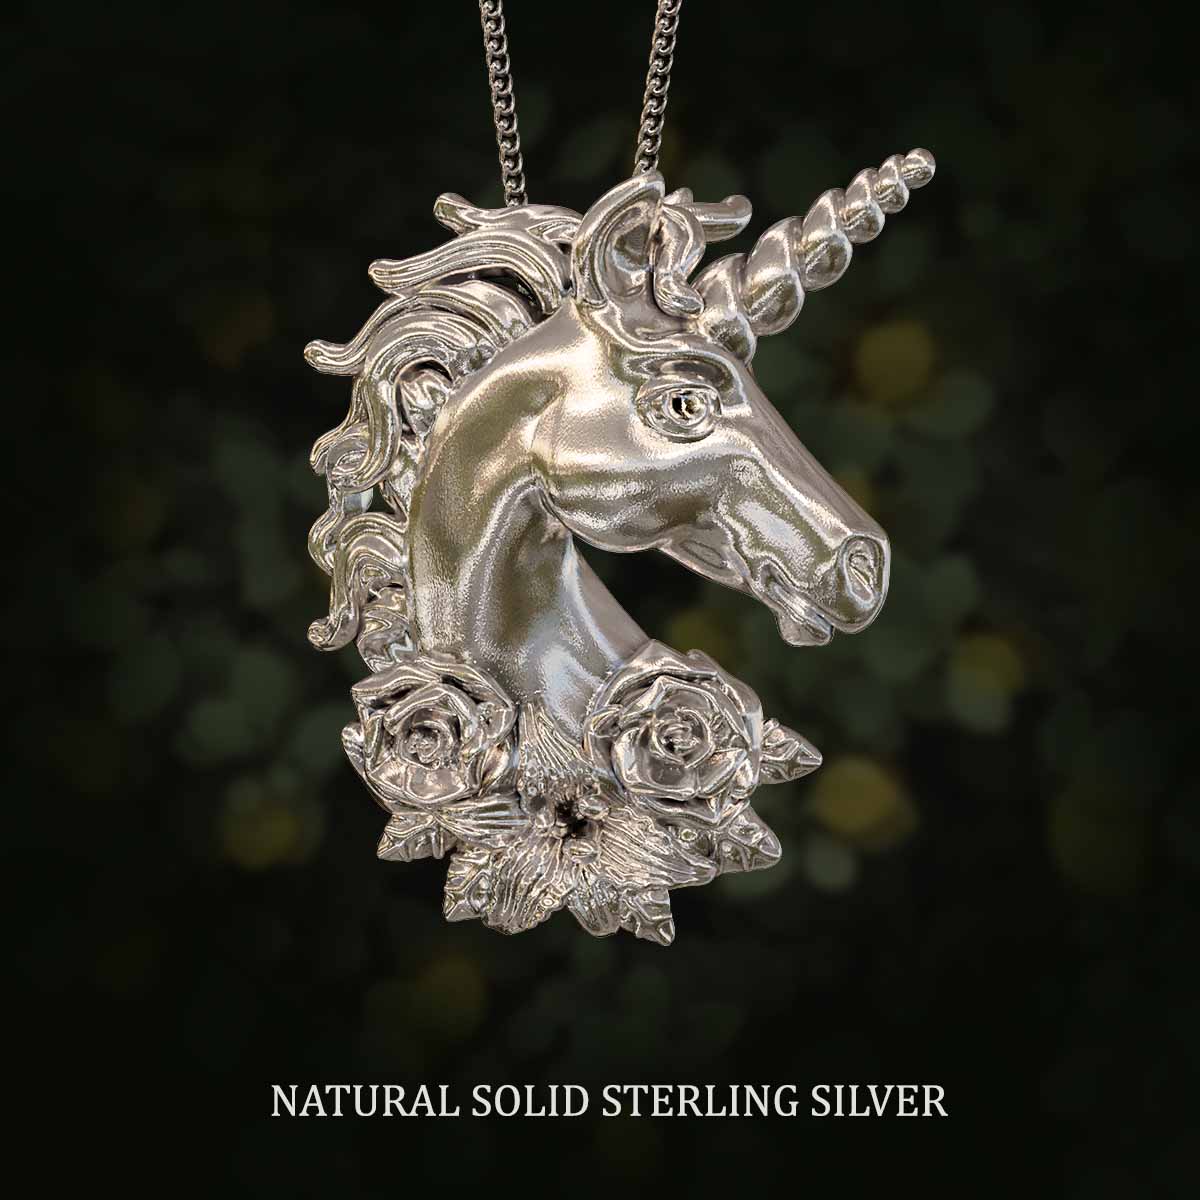 Natural-Satin-Polish-Solid-Sterling-Silver-Unicorn-With-Flowers-Pendant-Jewelry-For-Necklace